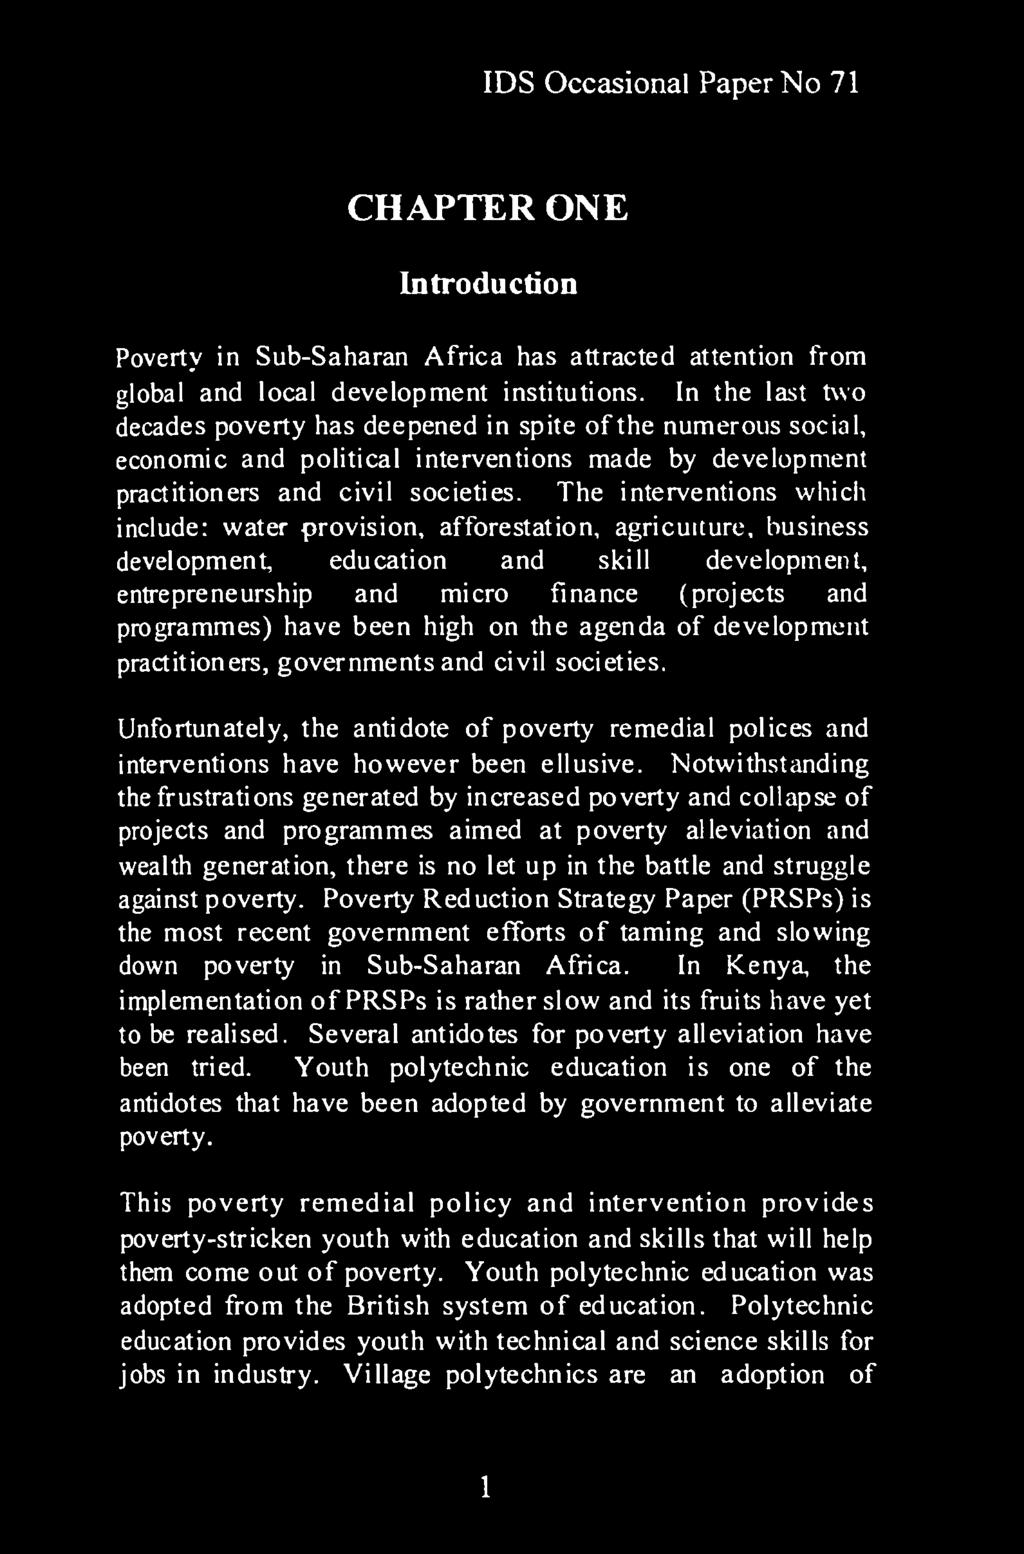 CHAPTER ONE Introduction Poverty in Sub-Saharan Africa has attracted attention from global and local development institutions.